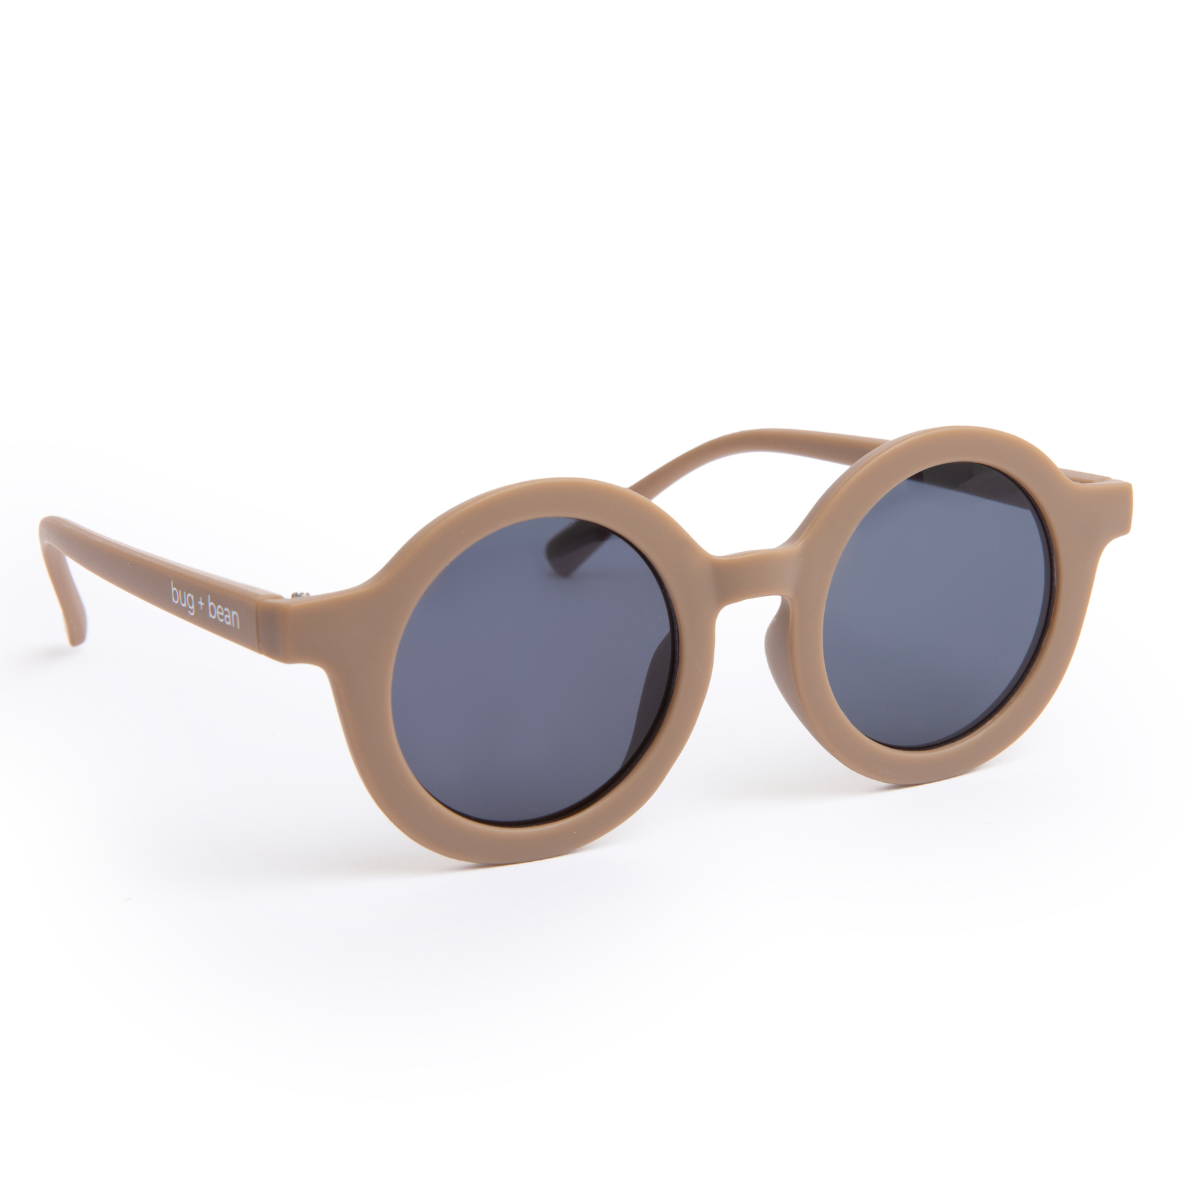 Recycled Children’s Sunglasses, Taupe